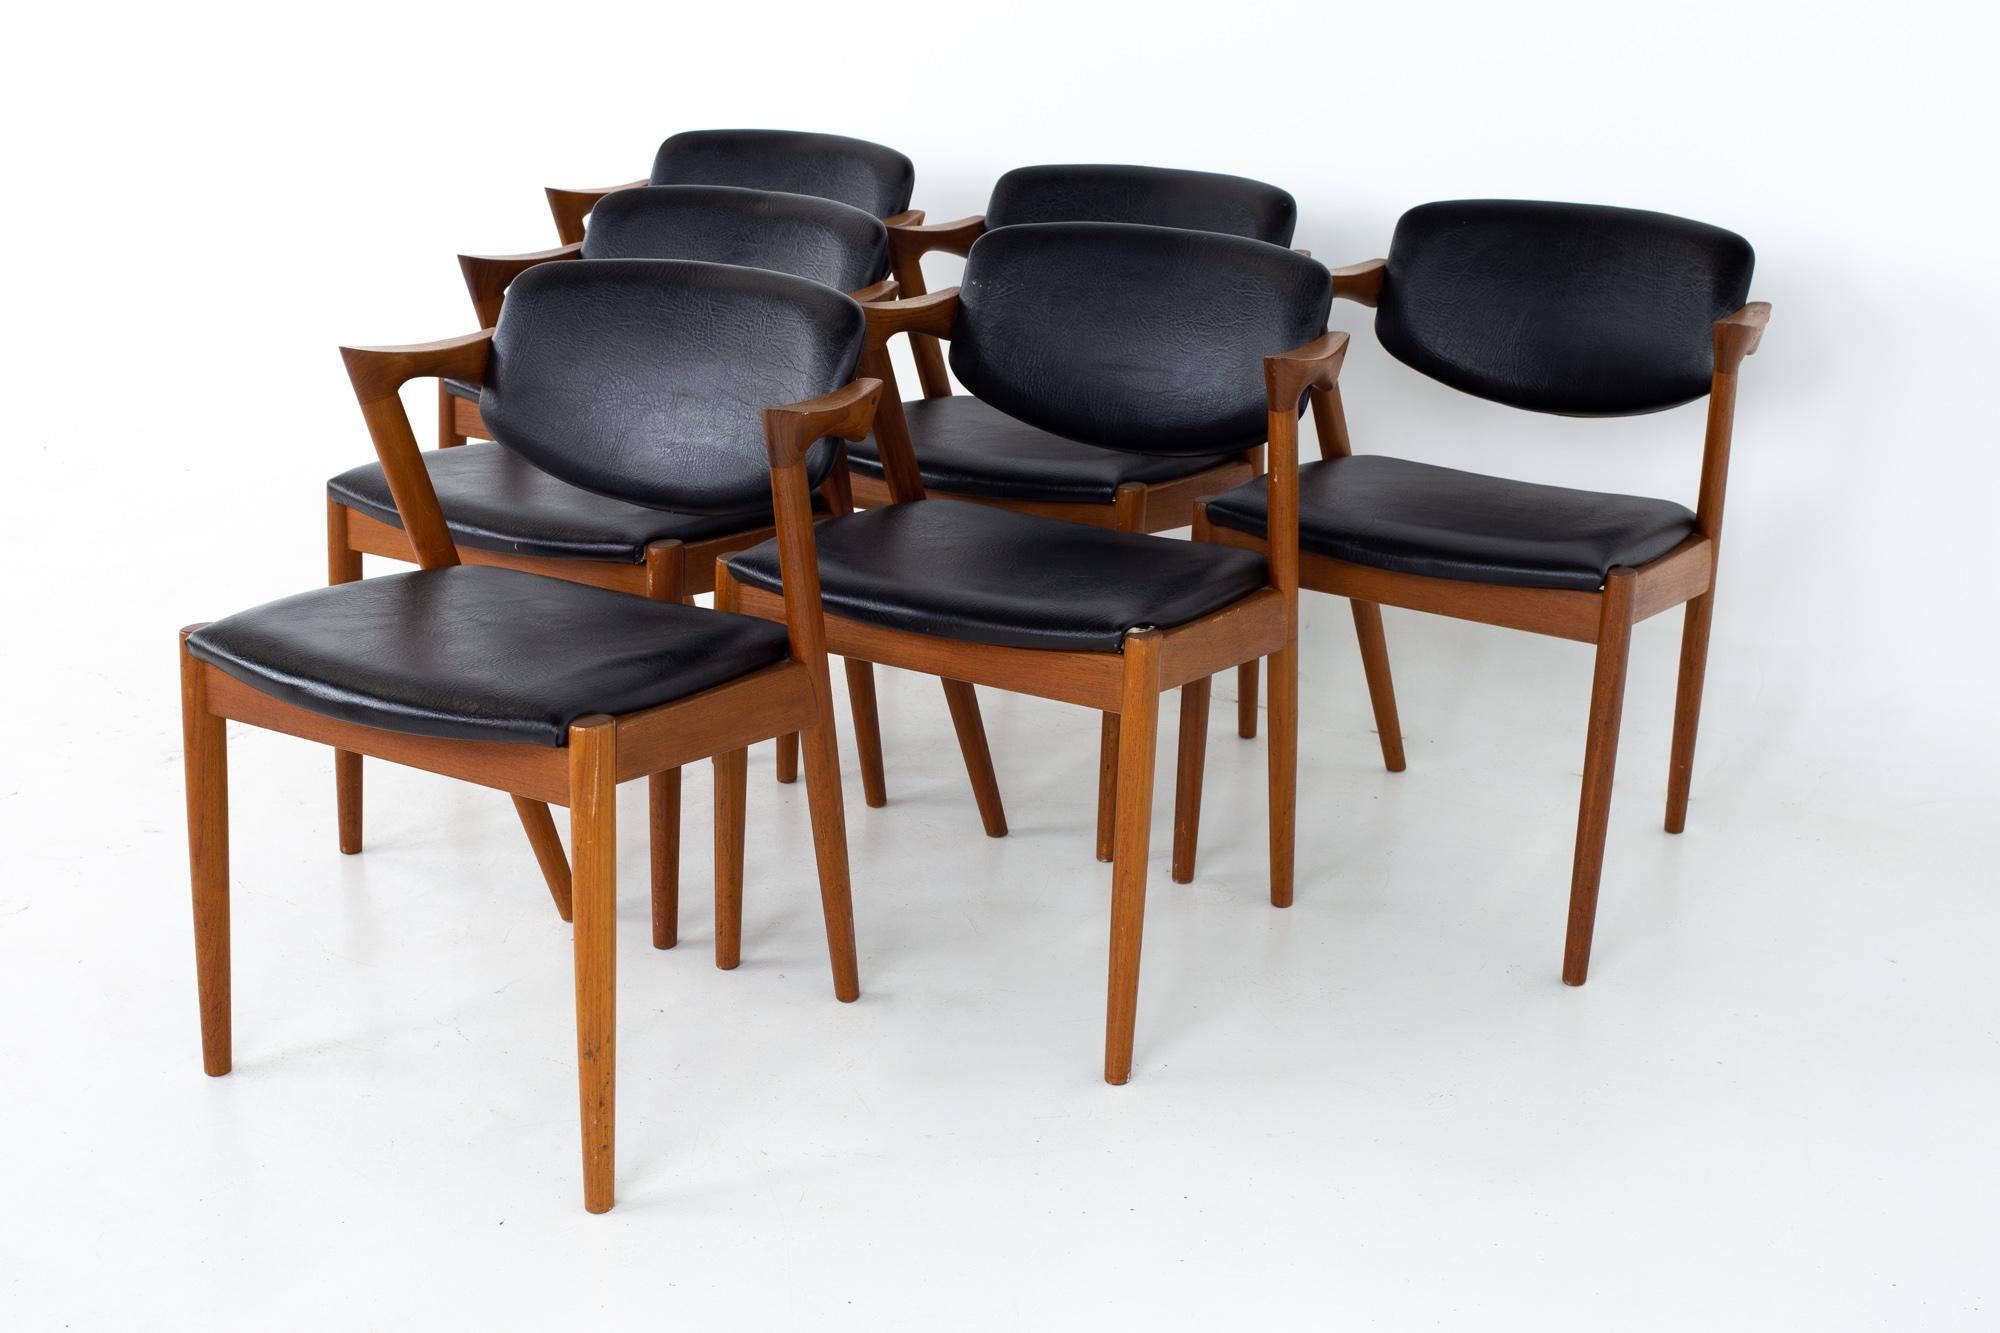 Kai Kristiansen for SVA Mobler model 42 mid century teak Z dining chairs - Set of 6
Each chair measures: 21.5 wide x 21.25 deep x x 29 high, with a seat height of 18 inches

All pieces of furniture can be had in what we call restored vintage